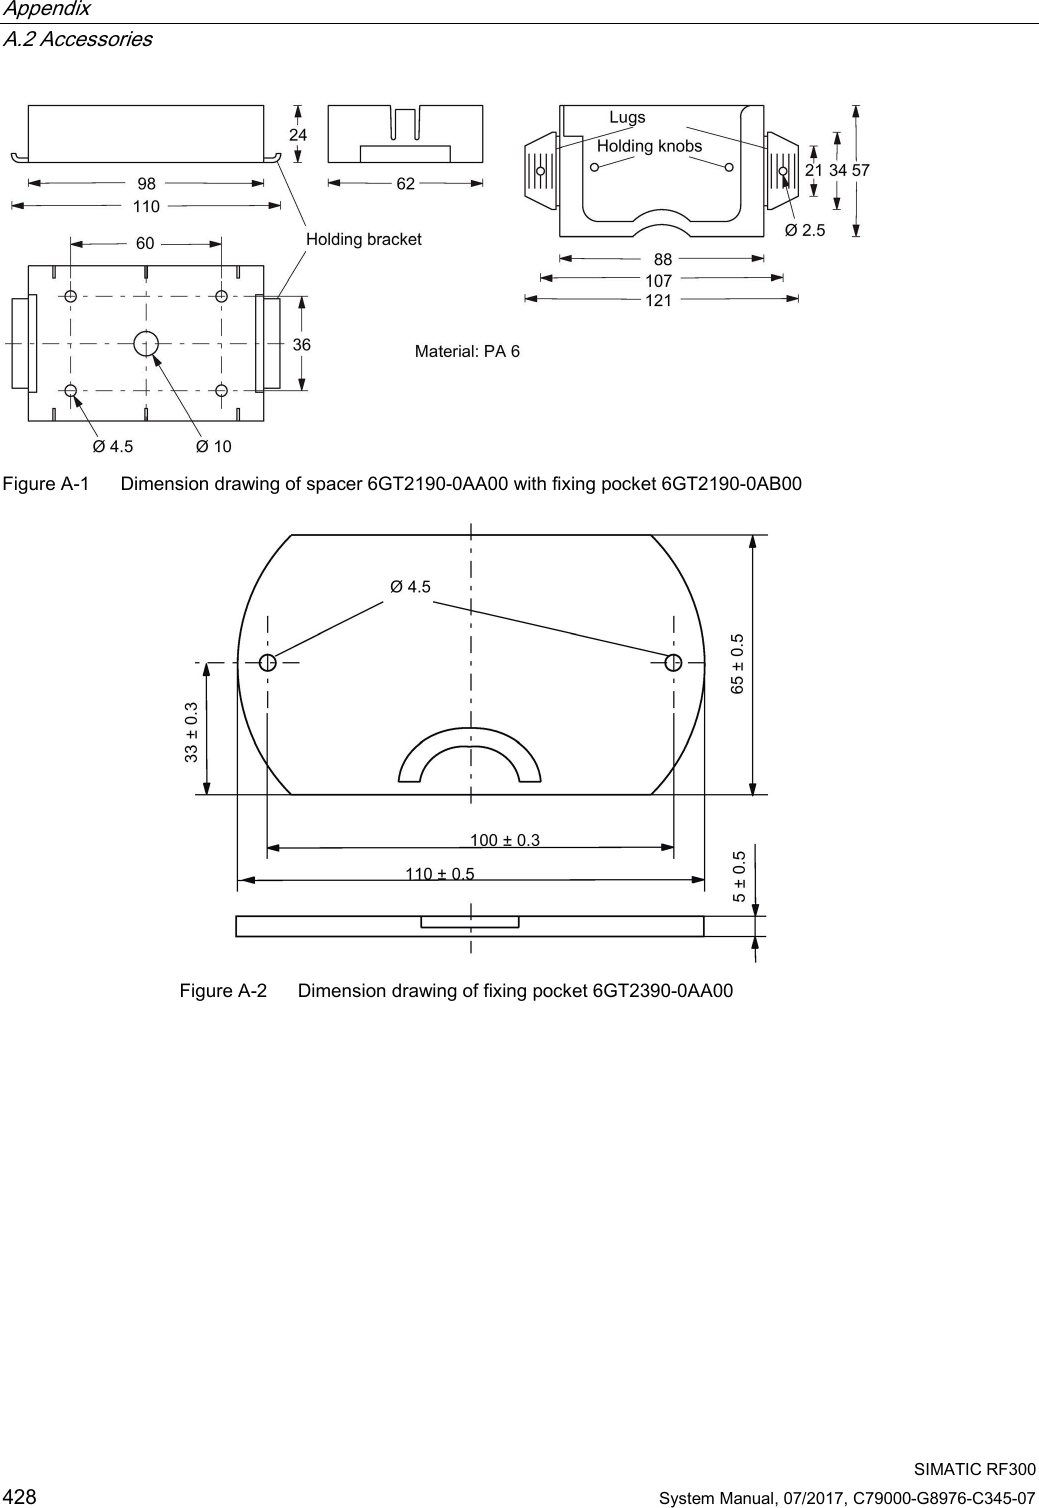 Appendix   A.2 Accessories  SIMATIC RF300 428 System Manual, 07/2017, C79000-G8976-C345-07  Figure A-1  Dimension drawing of spacer 6GT2190-0AA00 with fixing pocket 6GT2190-0AB00   Figure A-2  Dimension drawing of fixing pocket 6GT2390-0AA00 